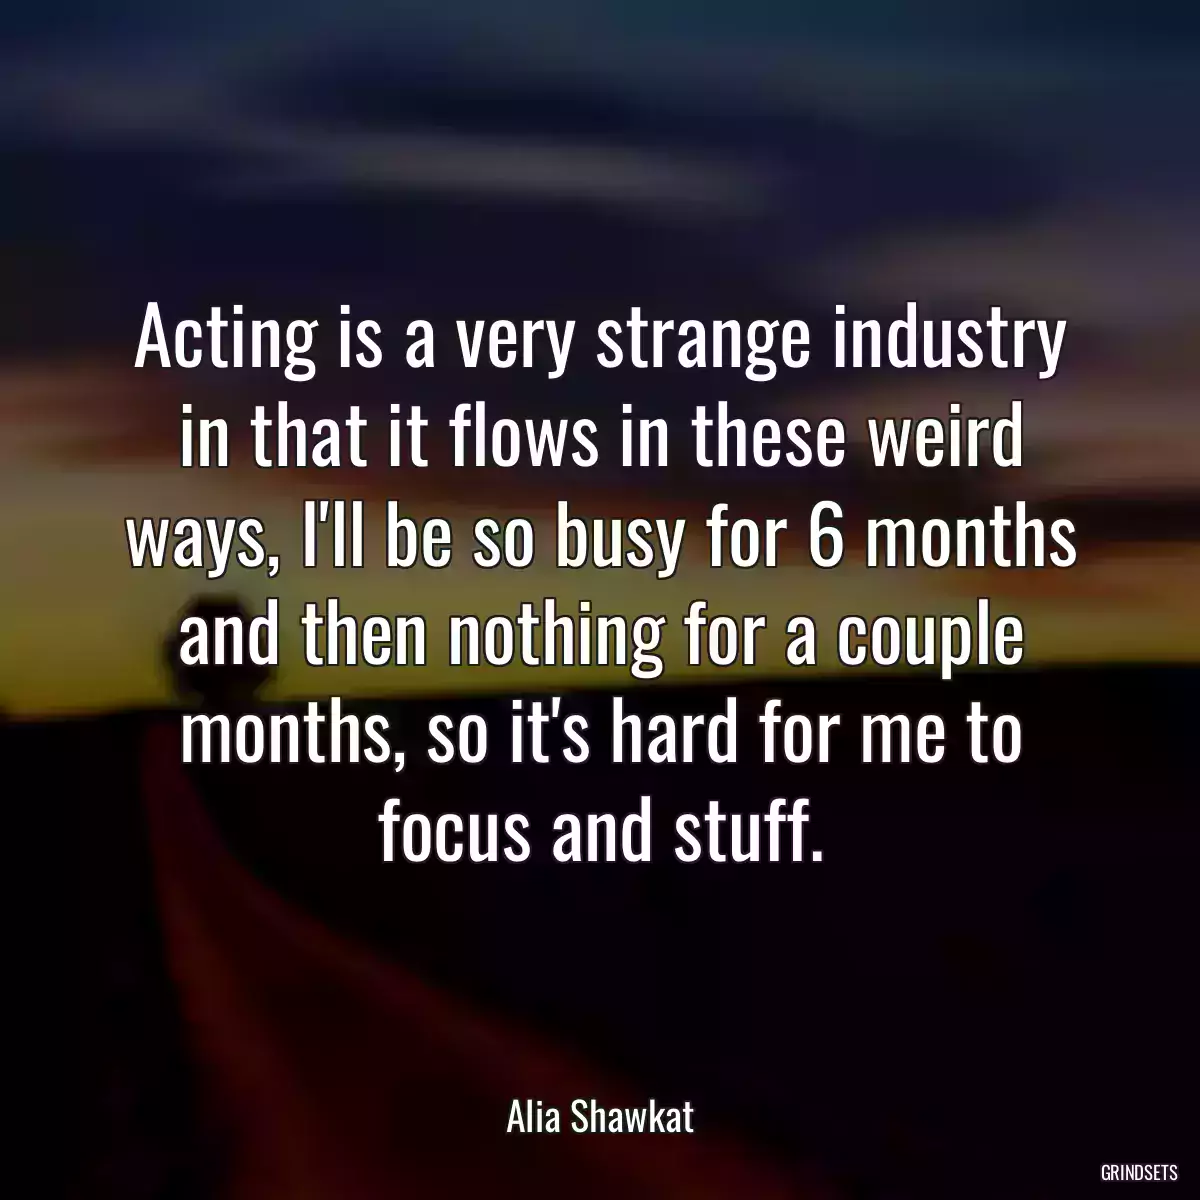 Acting is a very strange industry in that it flows in these weird ways, I\'ll be so busy for 6 months and then nothing for a couple months, so it\'s hard for me to focus and stuff.